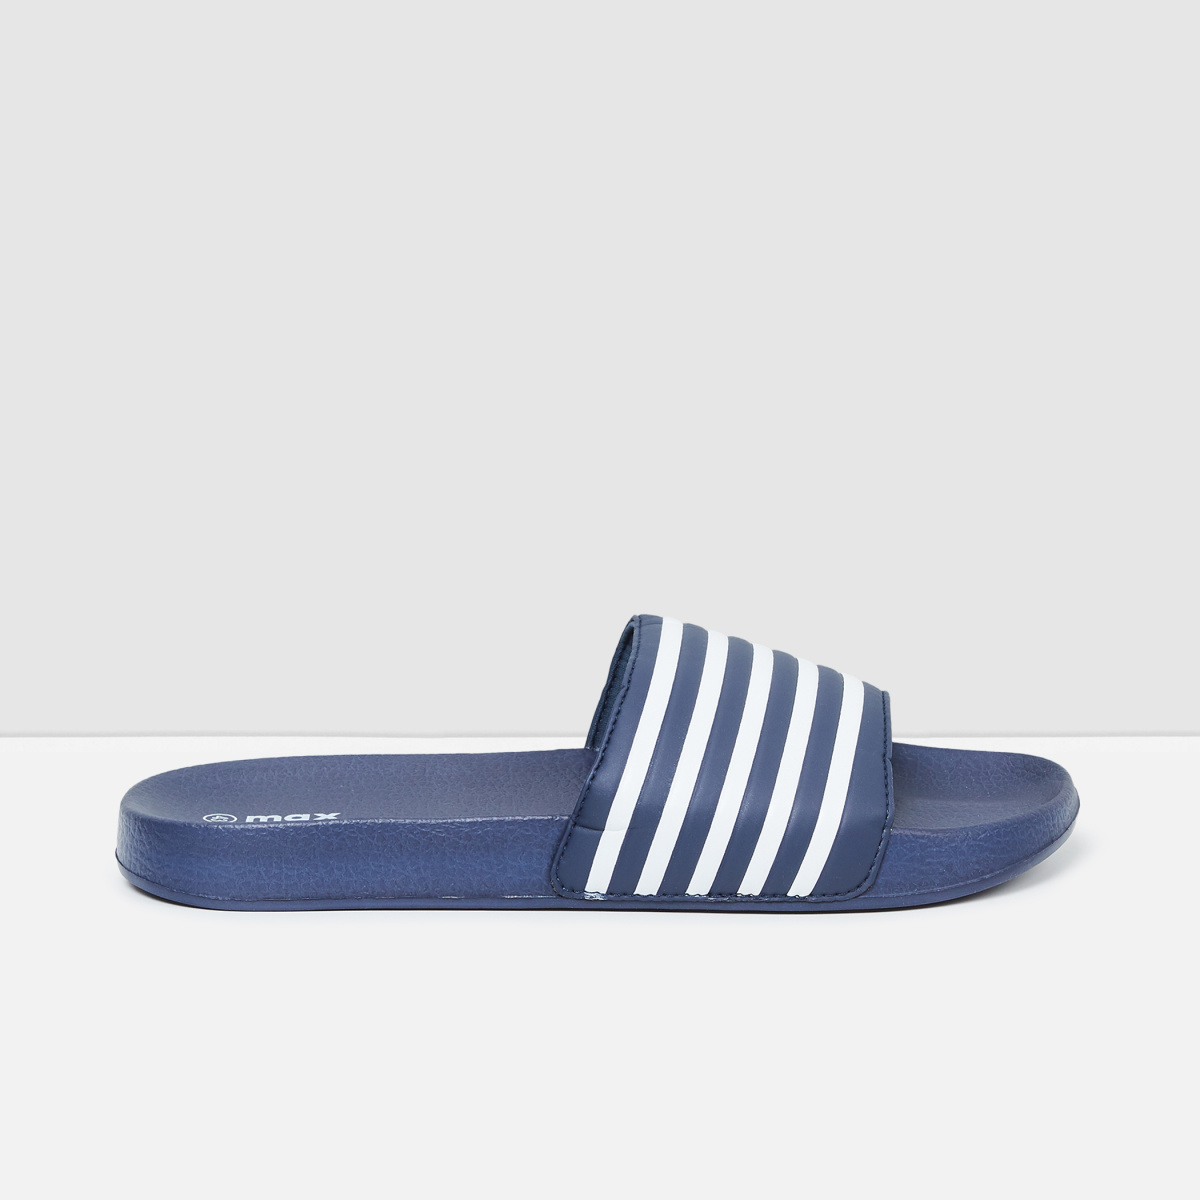 MAX Textured Sliders with Striped Strap